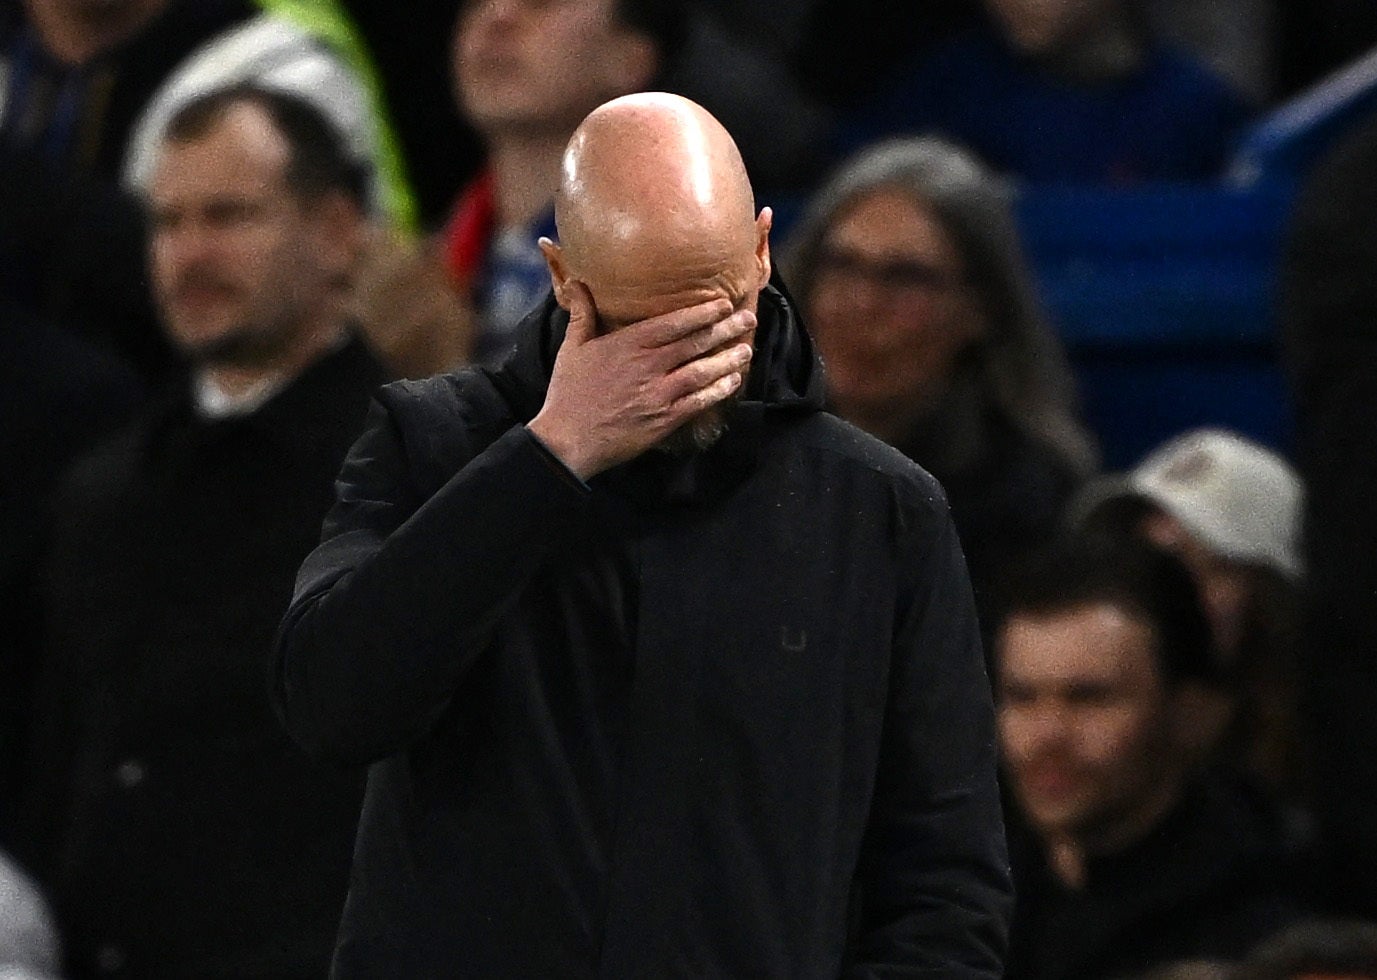 manchester united told erik ten hag 'already knows' his sacking is imminent